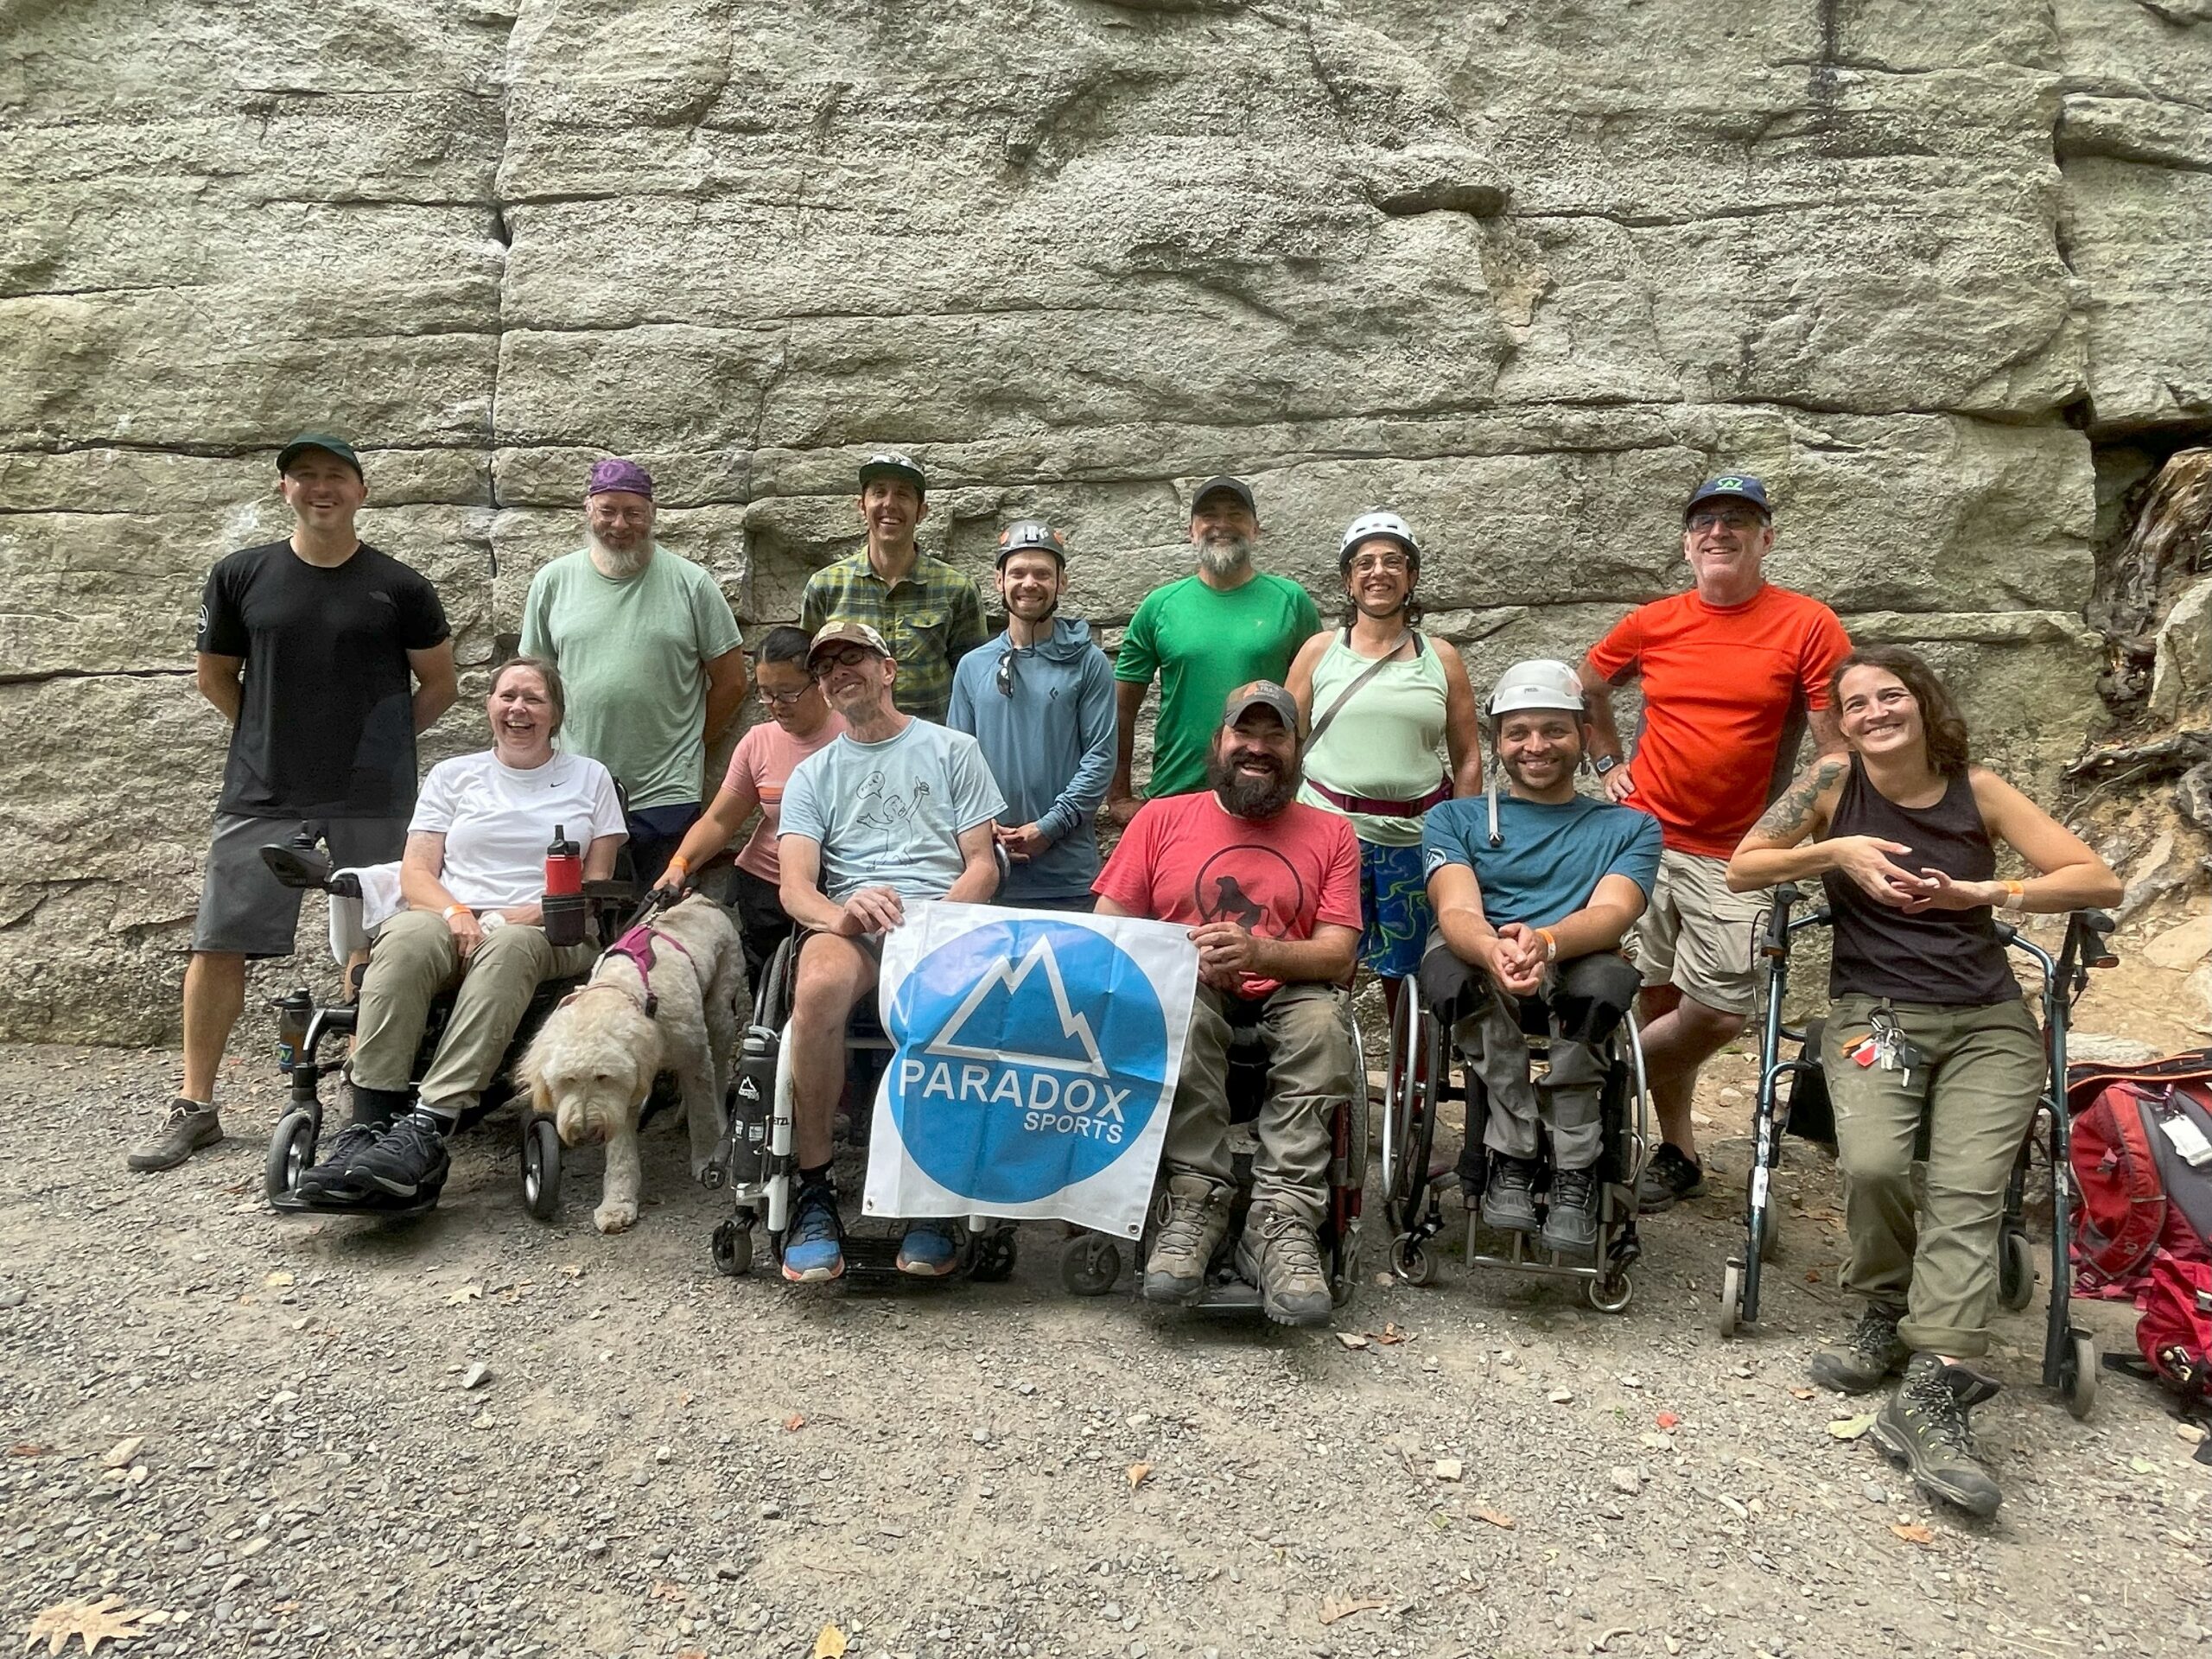 A group shot at the Gunks. The group is smiling at the camera and holding a Paradox Sports banner. They are standing in front of a rock wall.